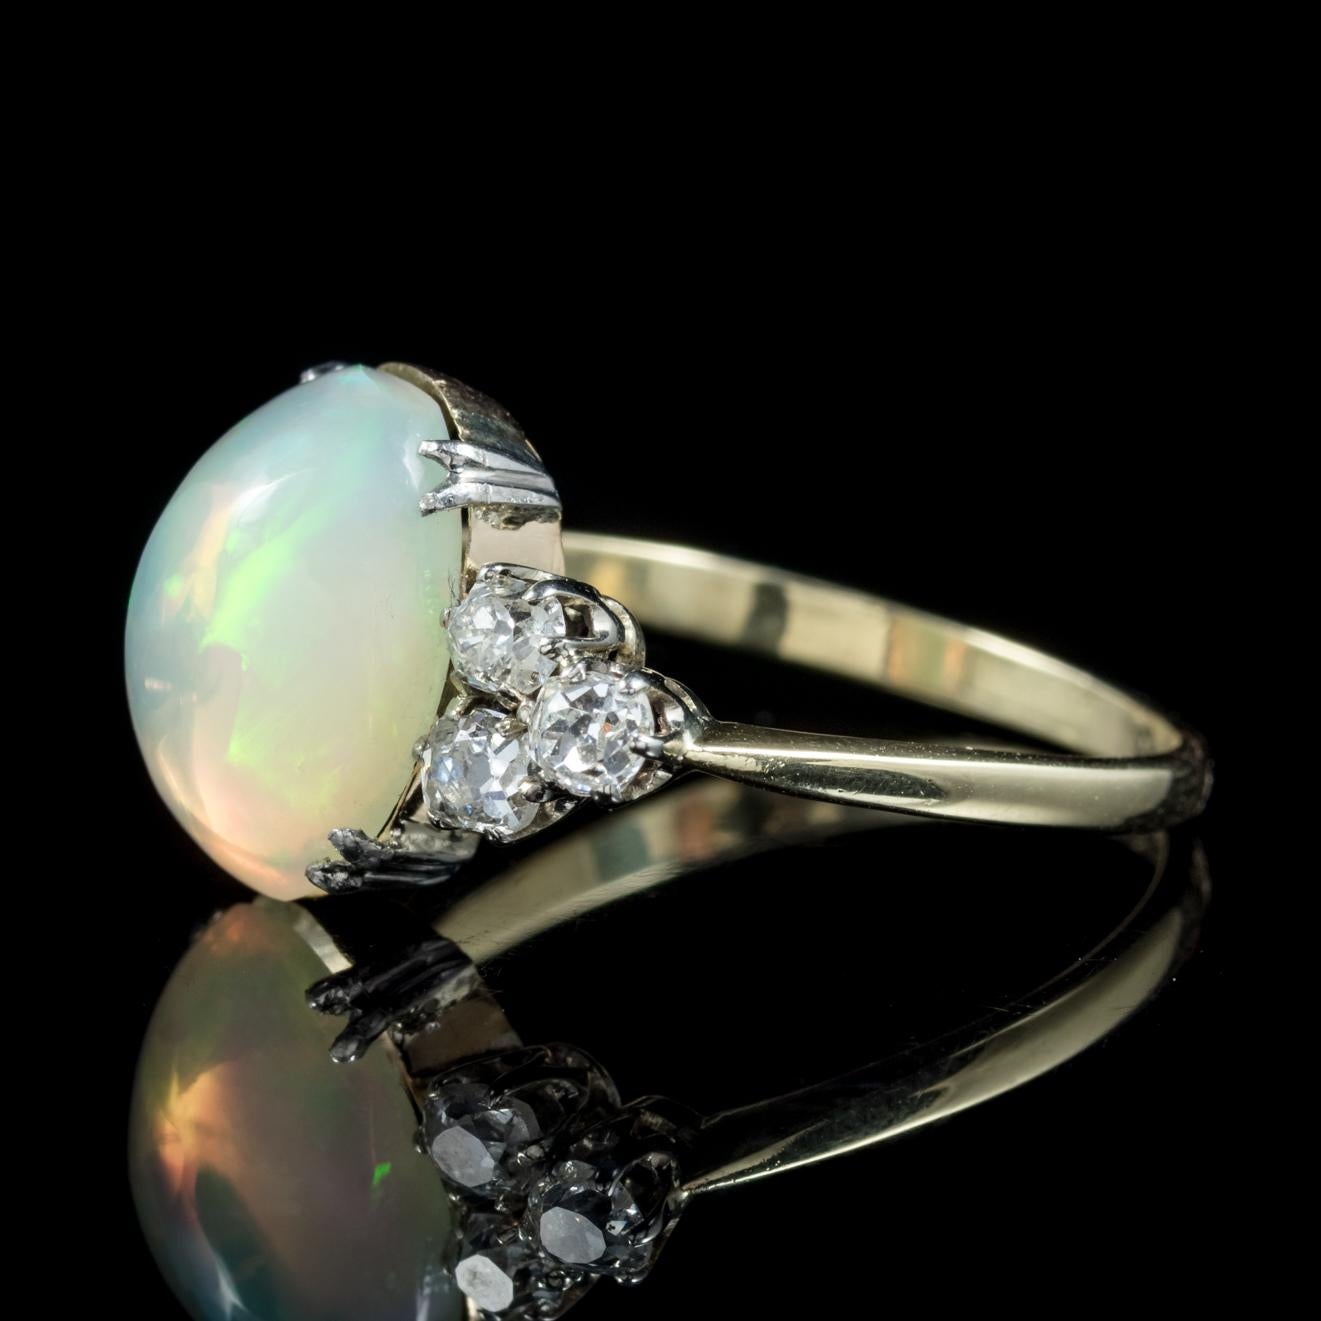 This fabulous antique Opal and Diamond ring is Edwardian, Circa 1910.

The ring displays a fabulous natural Opal in the centre which is over 5ct in size and complimented by six old cushion cut Diamonds at either side.

The lovely natural Opal is a